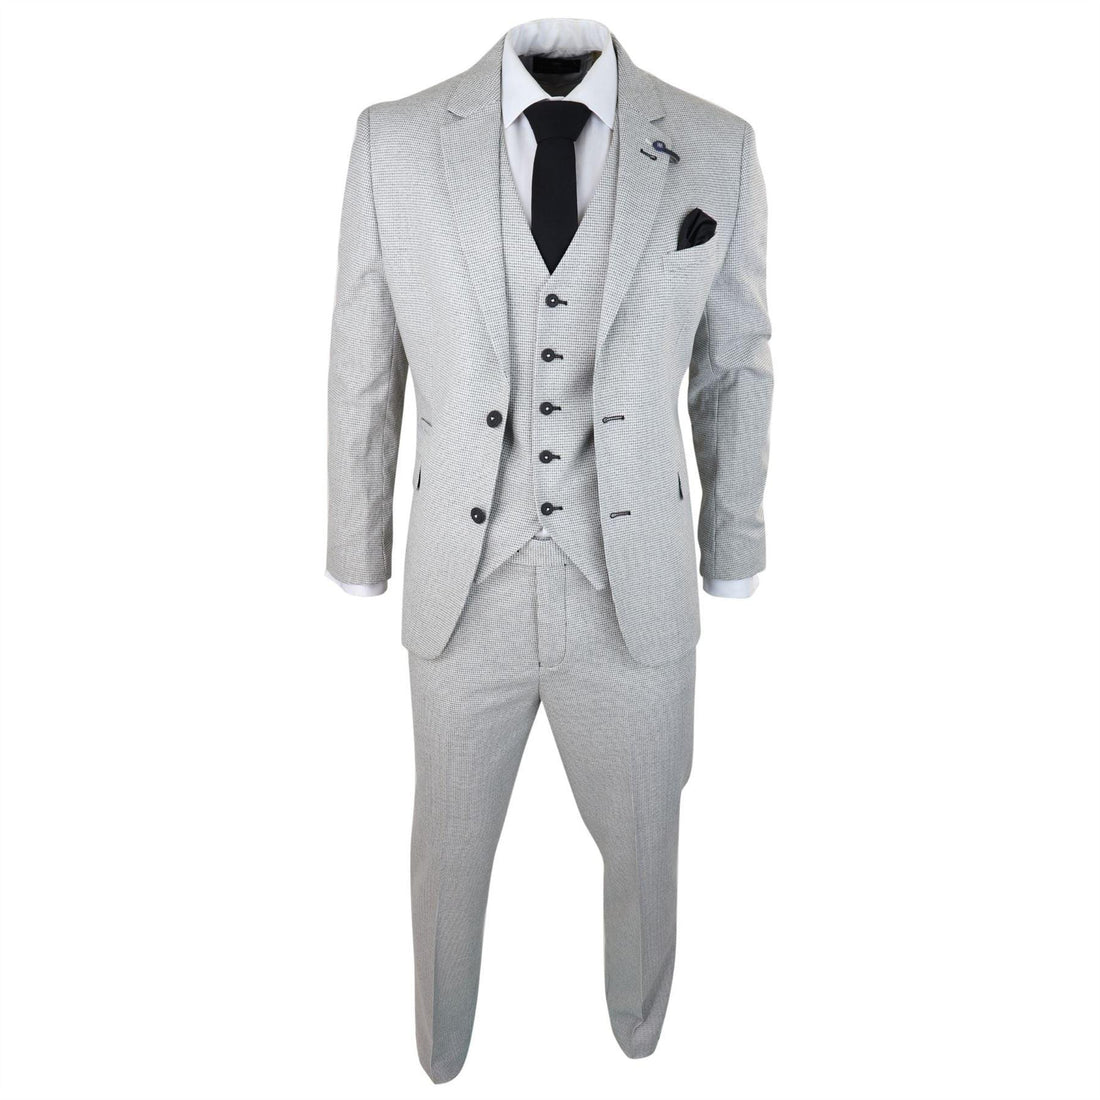 Mens 3 Piece Light Grey Black Check Suit Tailored Fit Retro Vintage Classic Smart - Knighthood Store